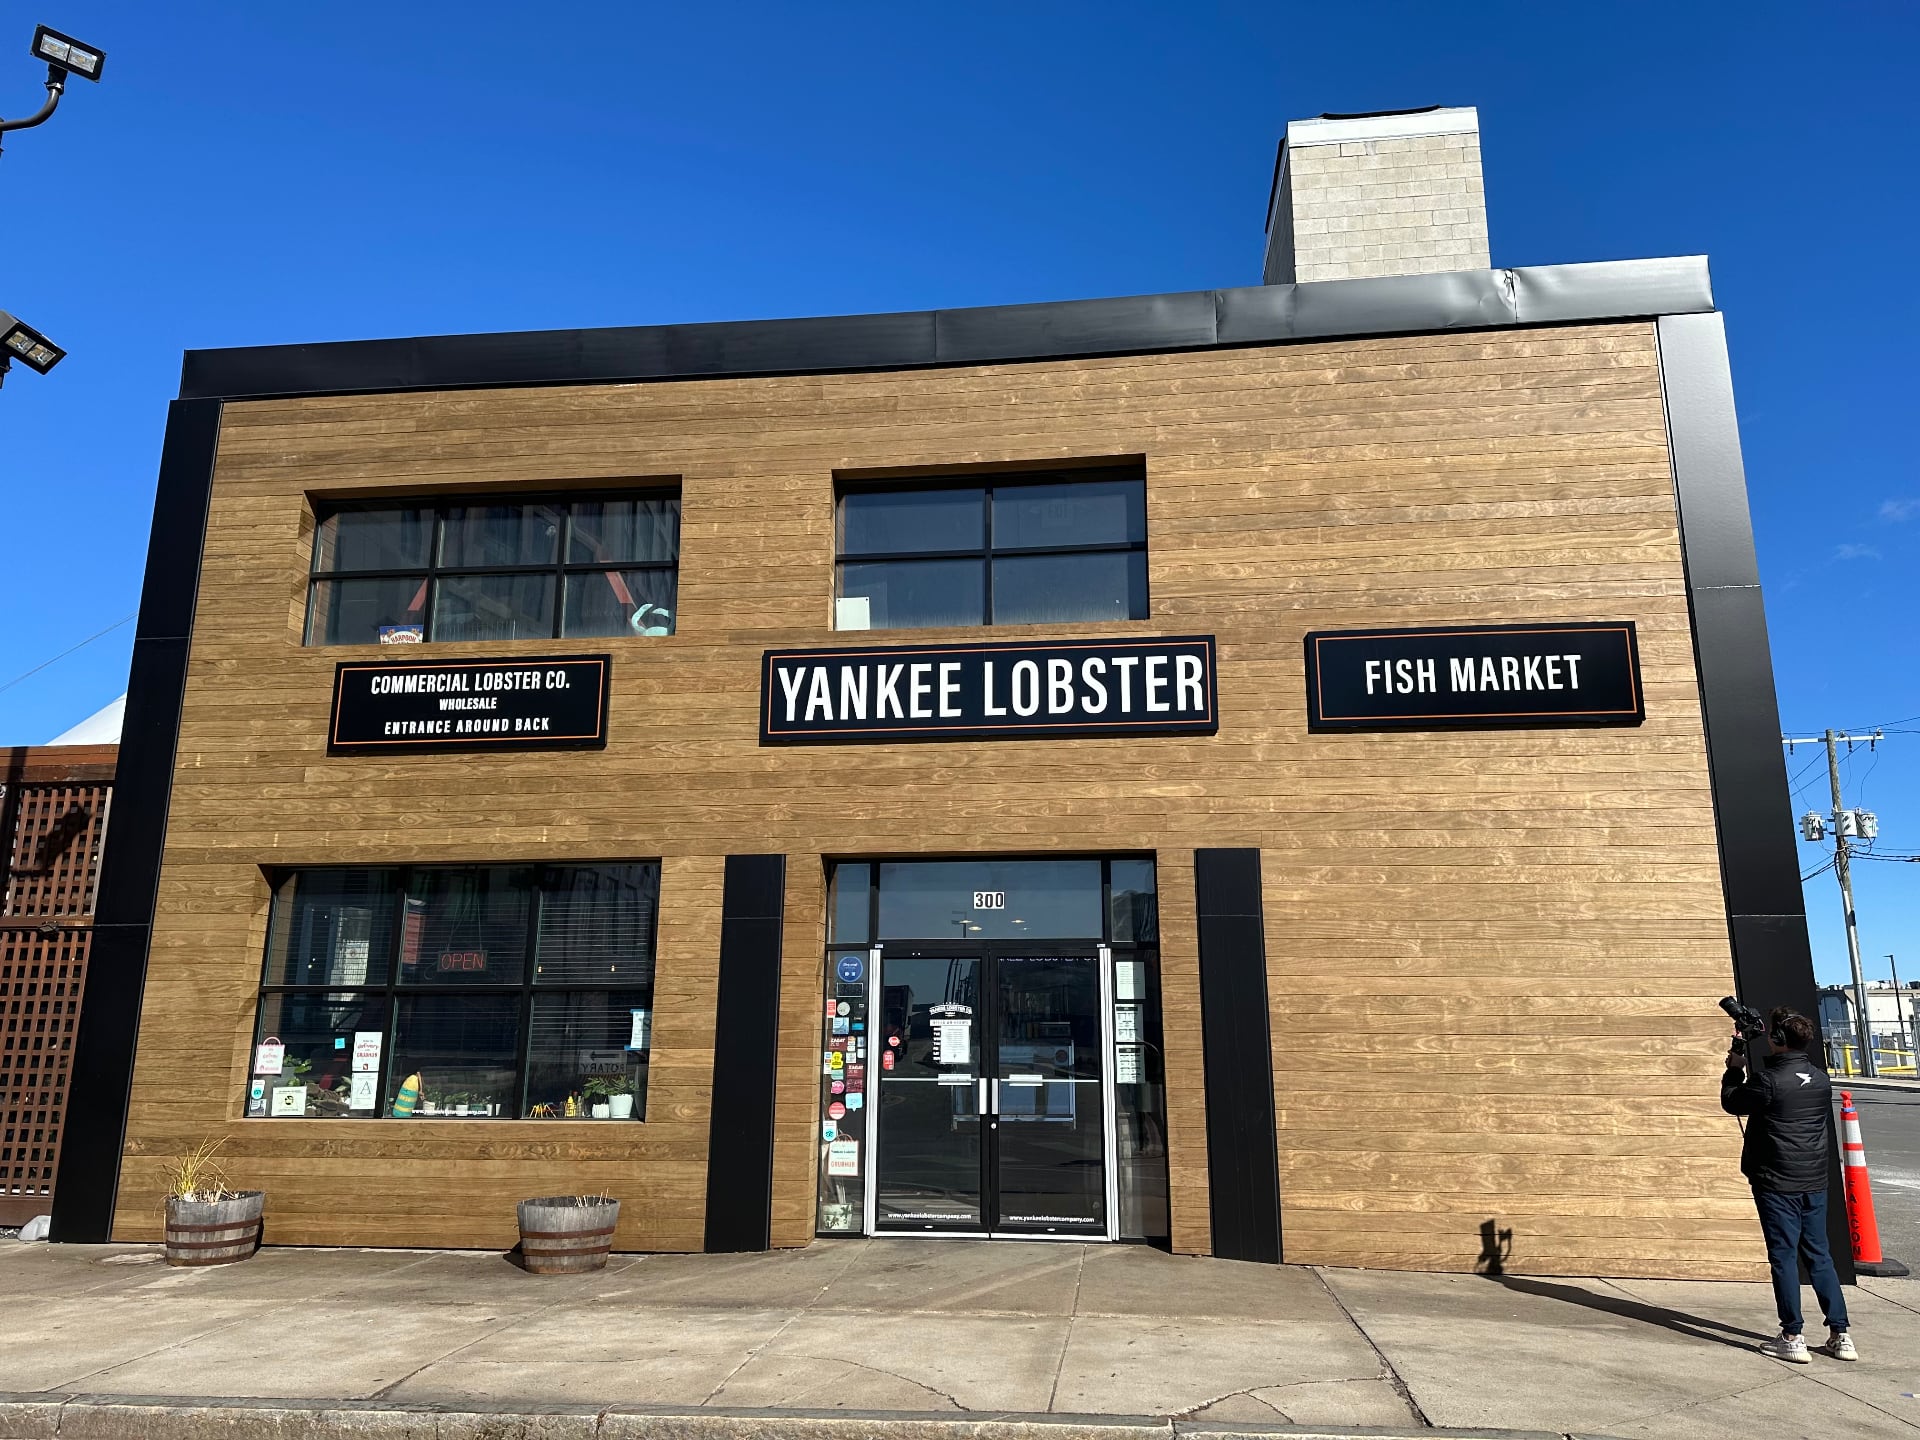 Falcon Real Estate - Yankee Lobster - Seaport